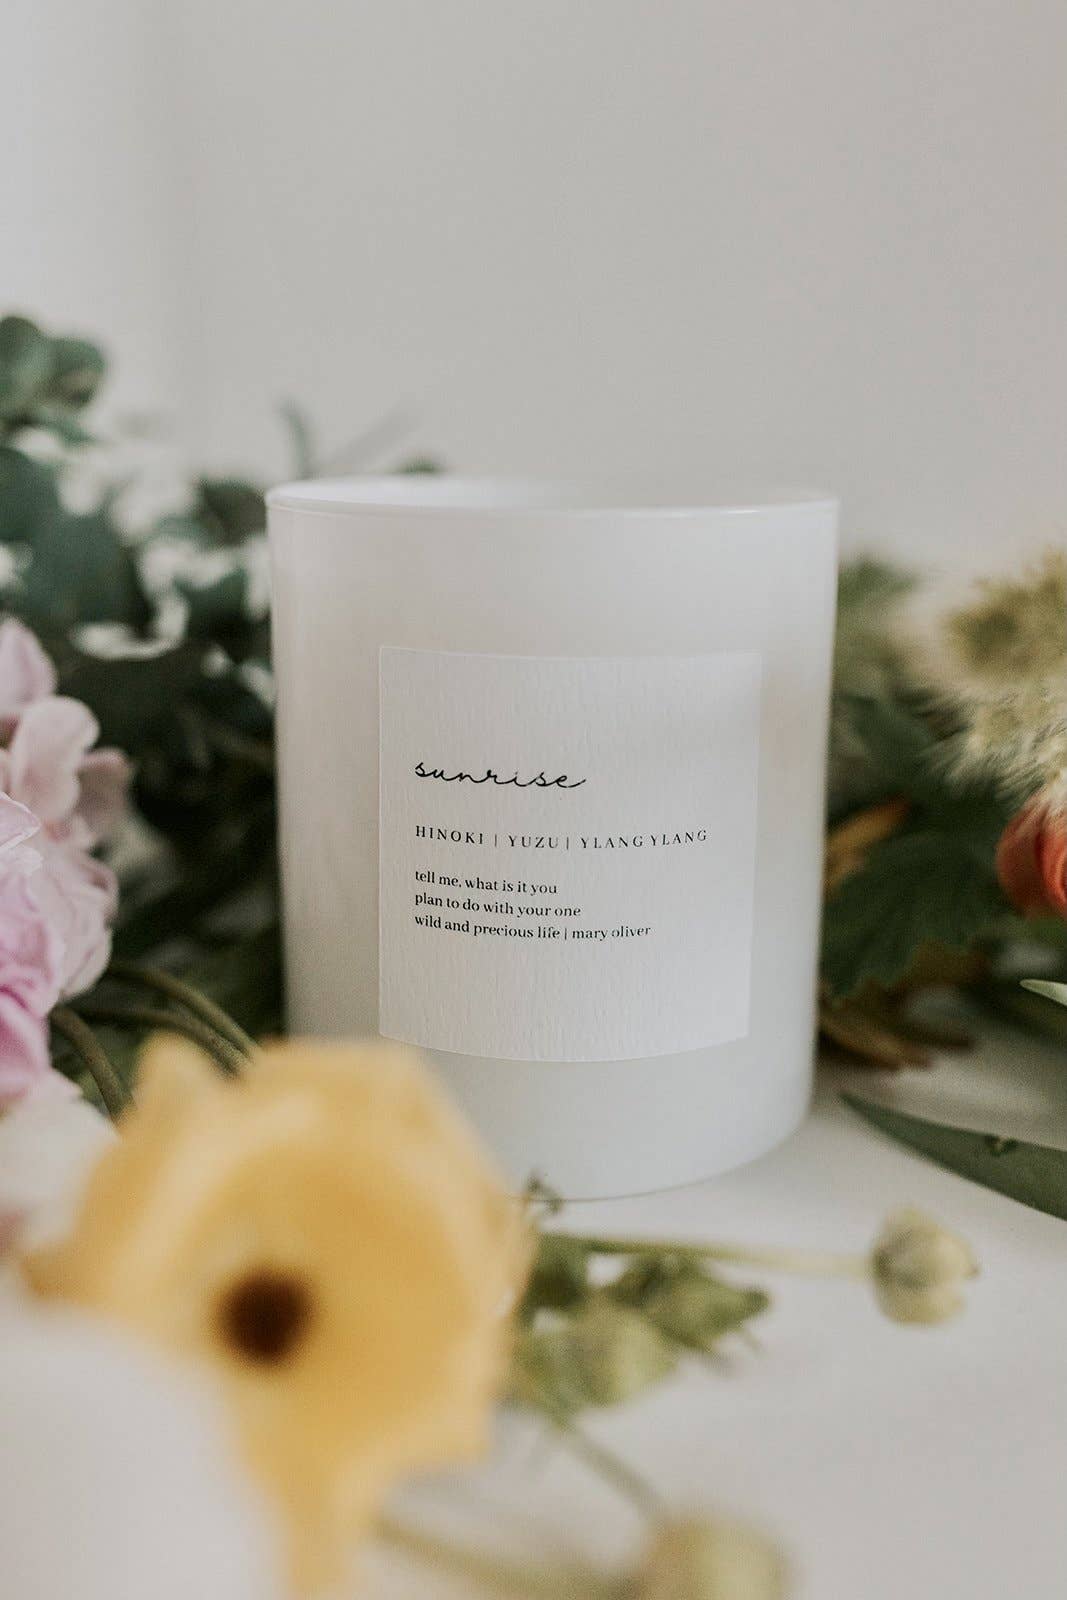 The Sunrise Candle by Wild Poet